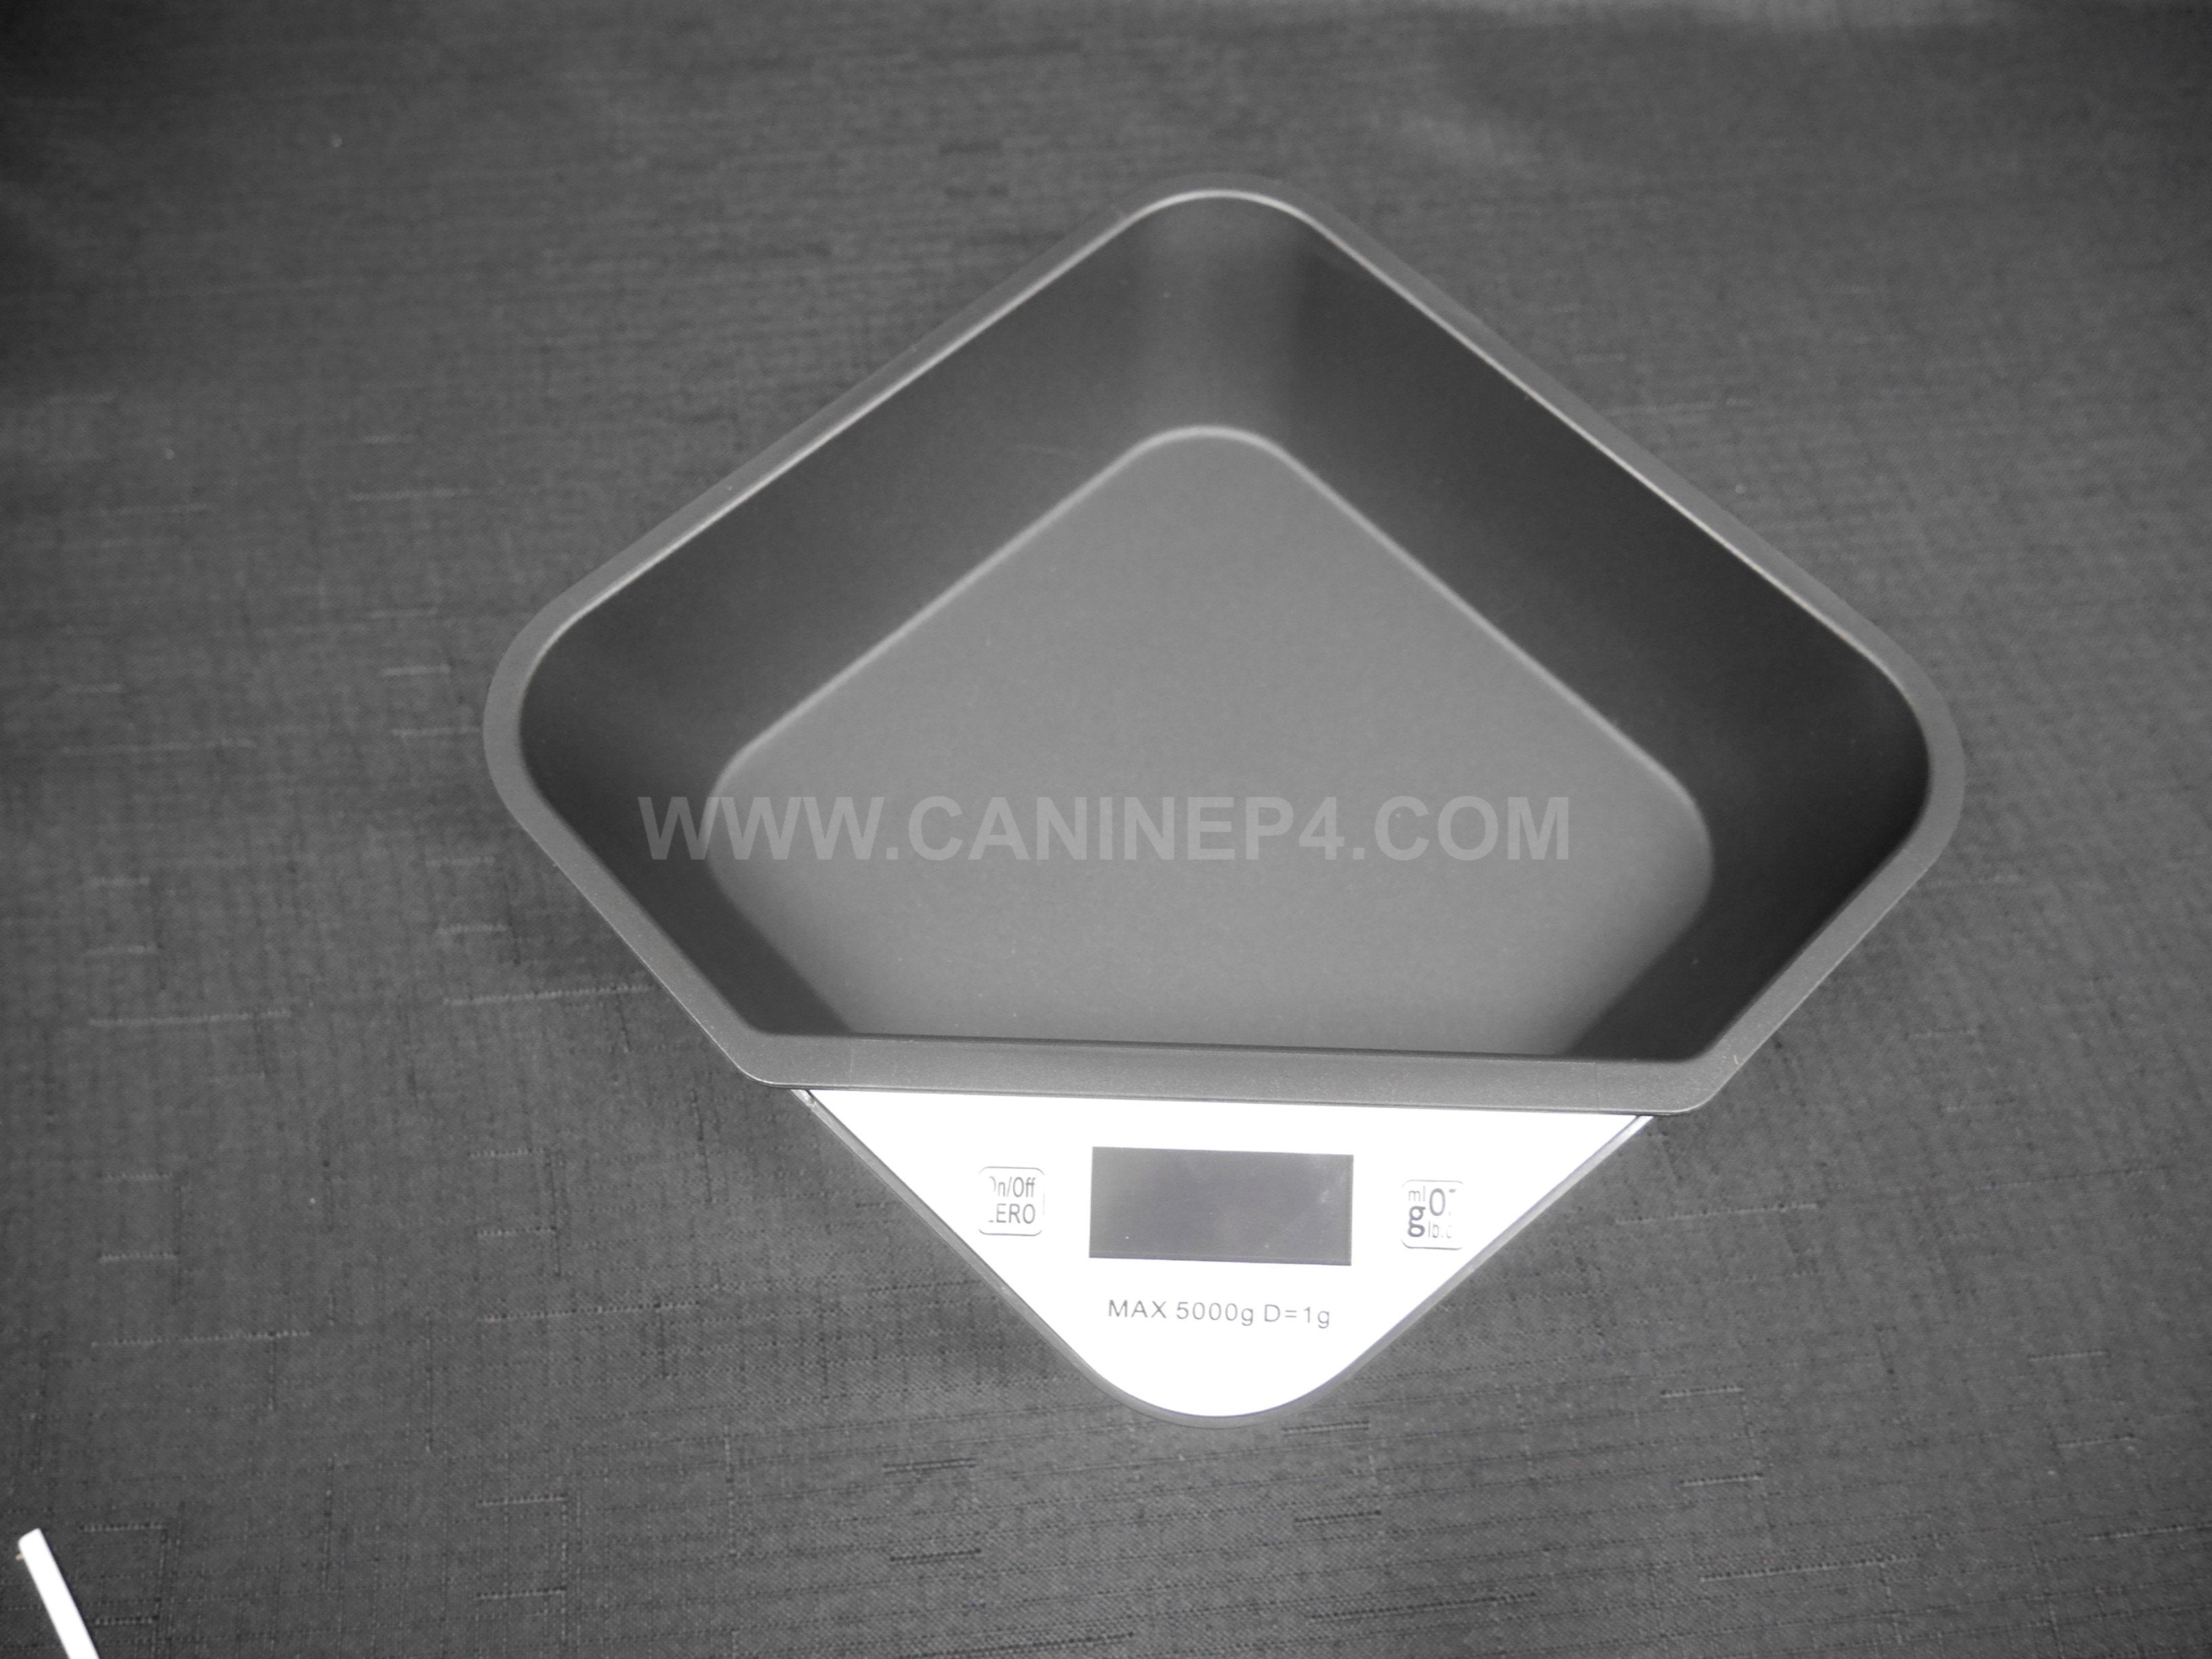 Puppy Weighing Scales, Digital, Whelping, 1g Increments, Kitten